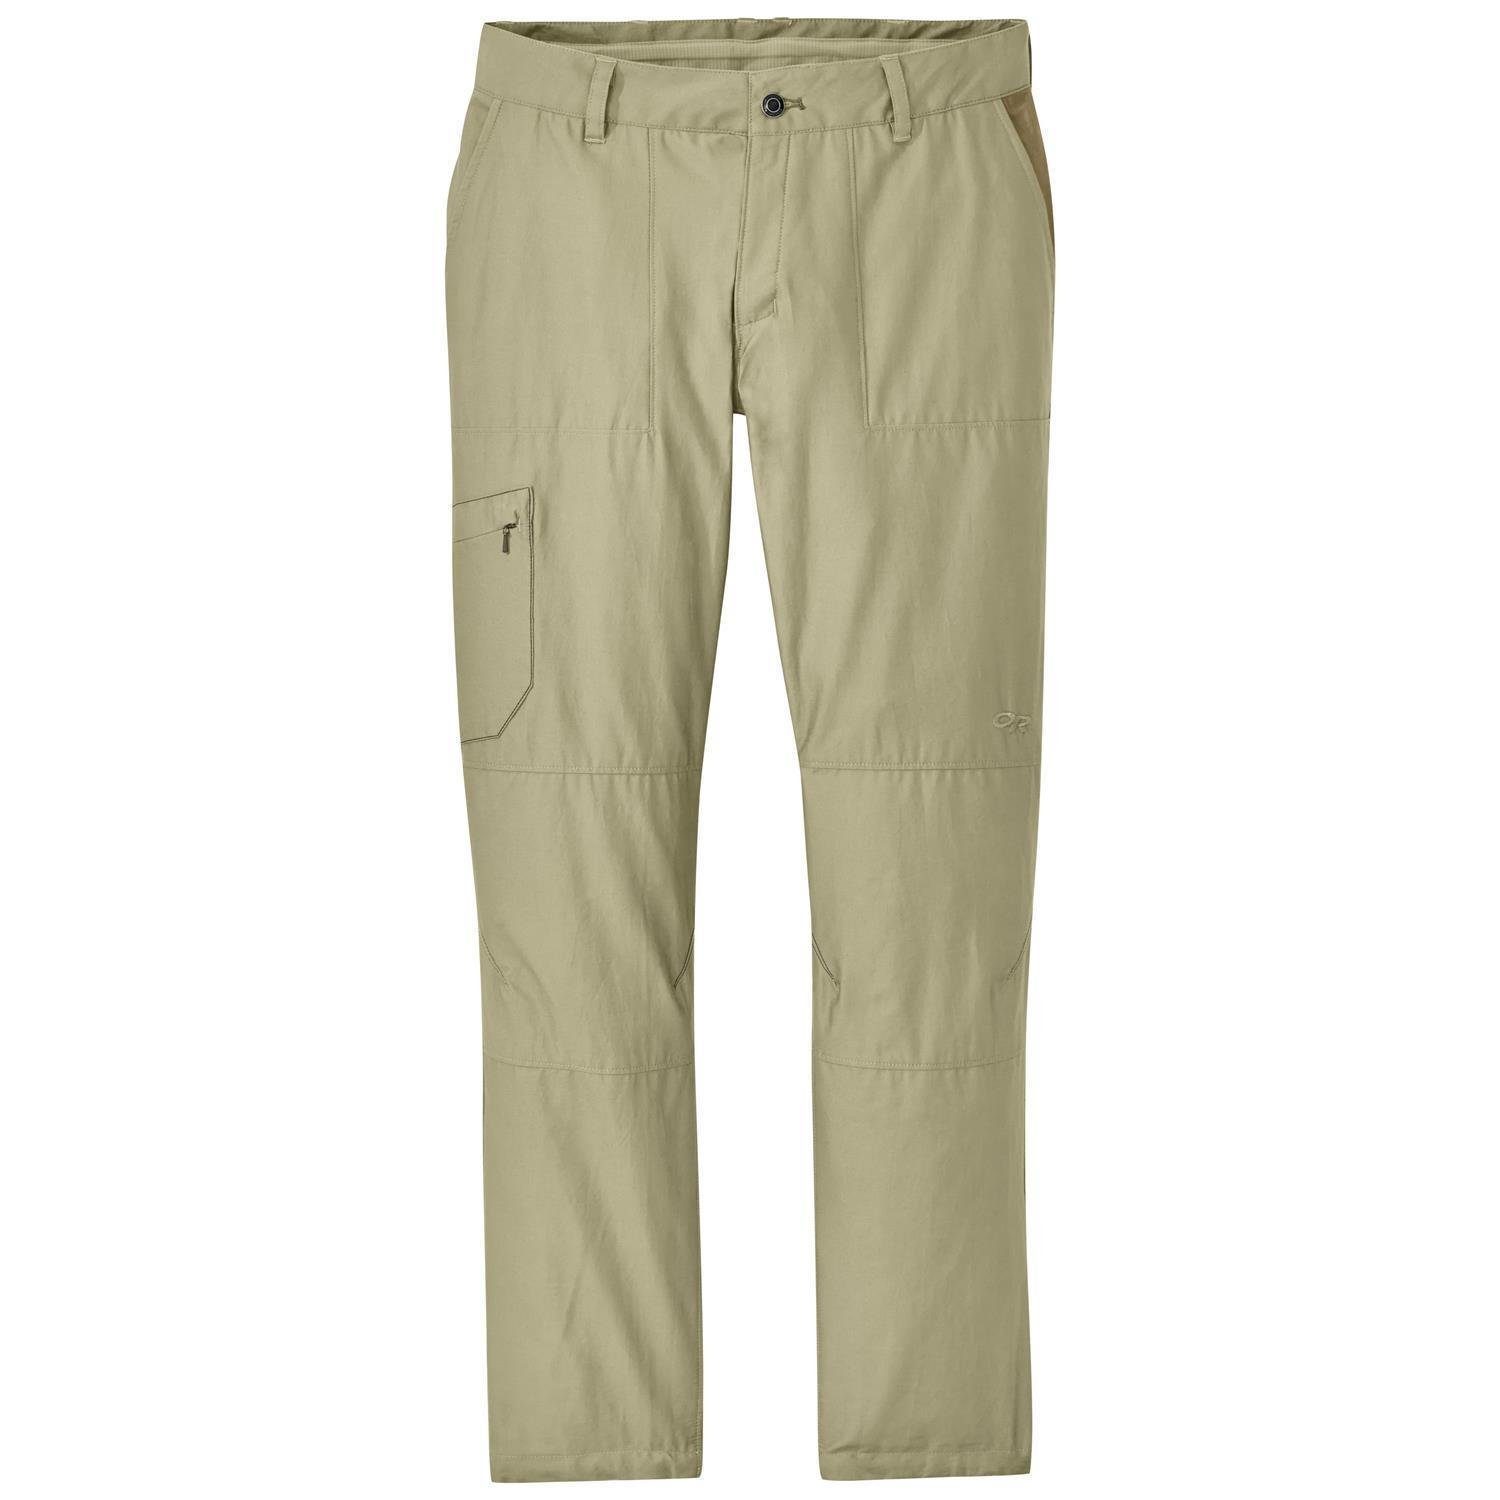 beige OR Women's (1-tlg) Research Wanderhose Laufhose Quarry Research Outdoor Outdoor